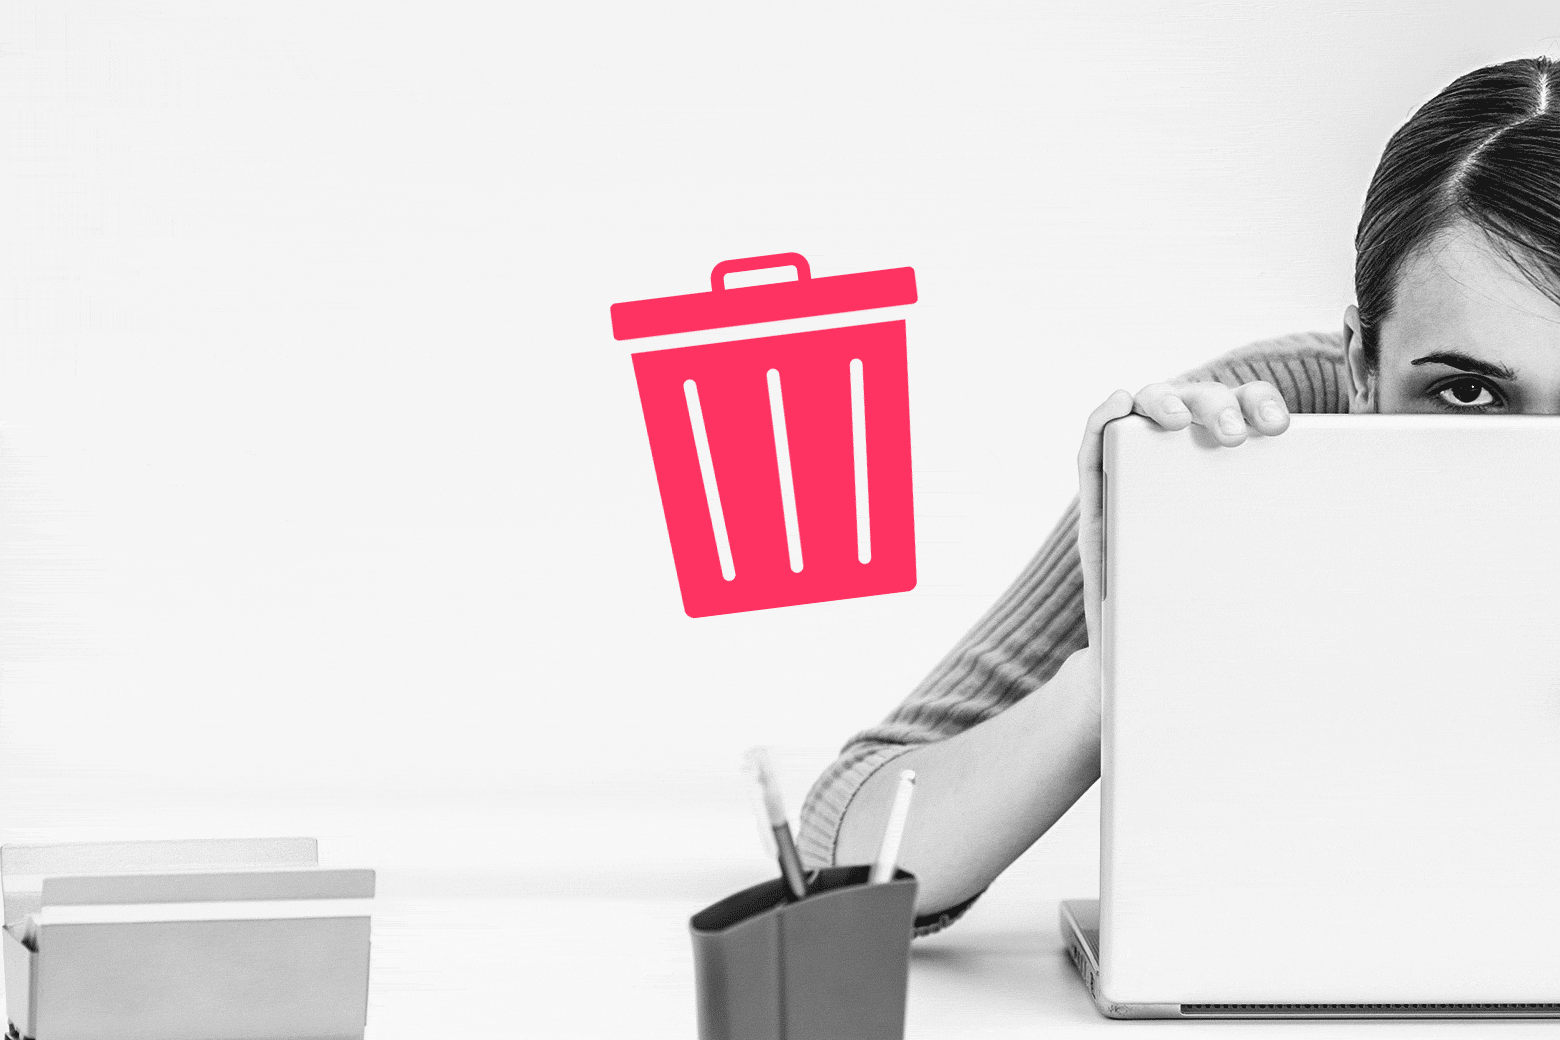 A woman peers sneakily over a laptop beside a wiggling trash can icon